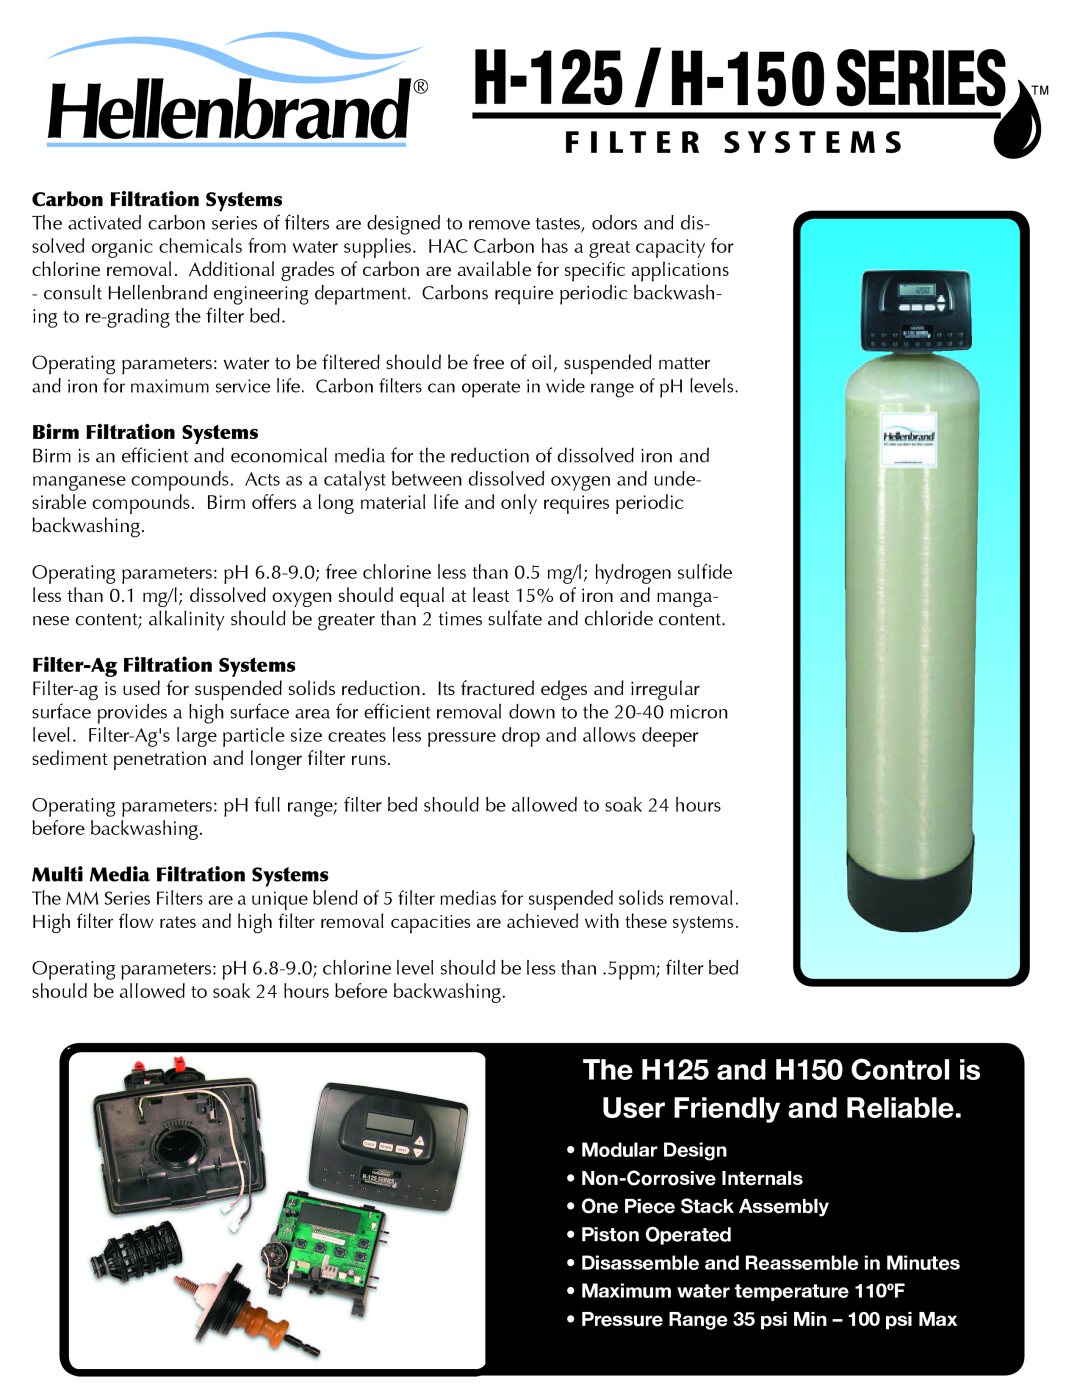 Hellenbrand H125 Series manual Carbon Filtration Systems, Birm Filtration Systems, Filter-Ag Filtration Systems 